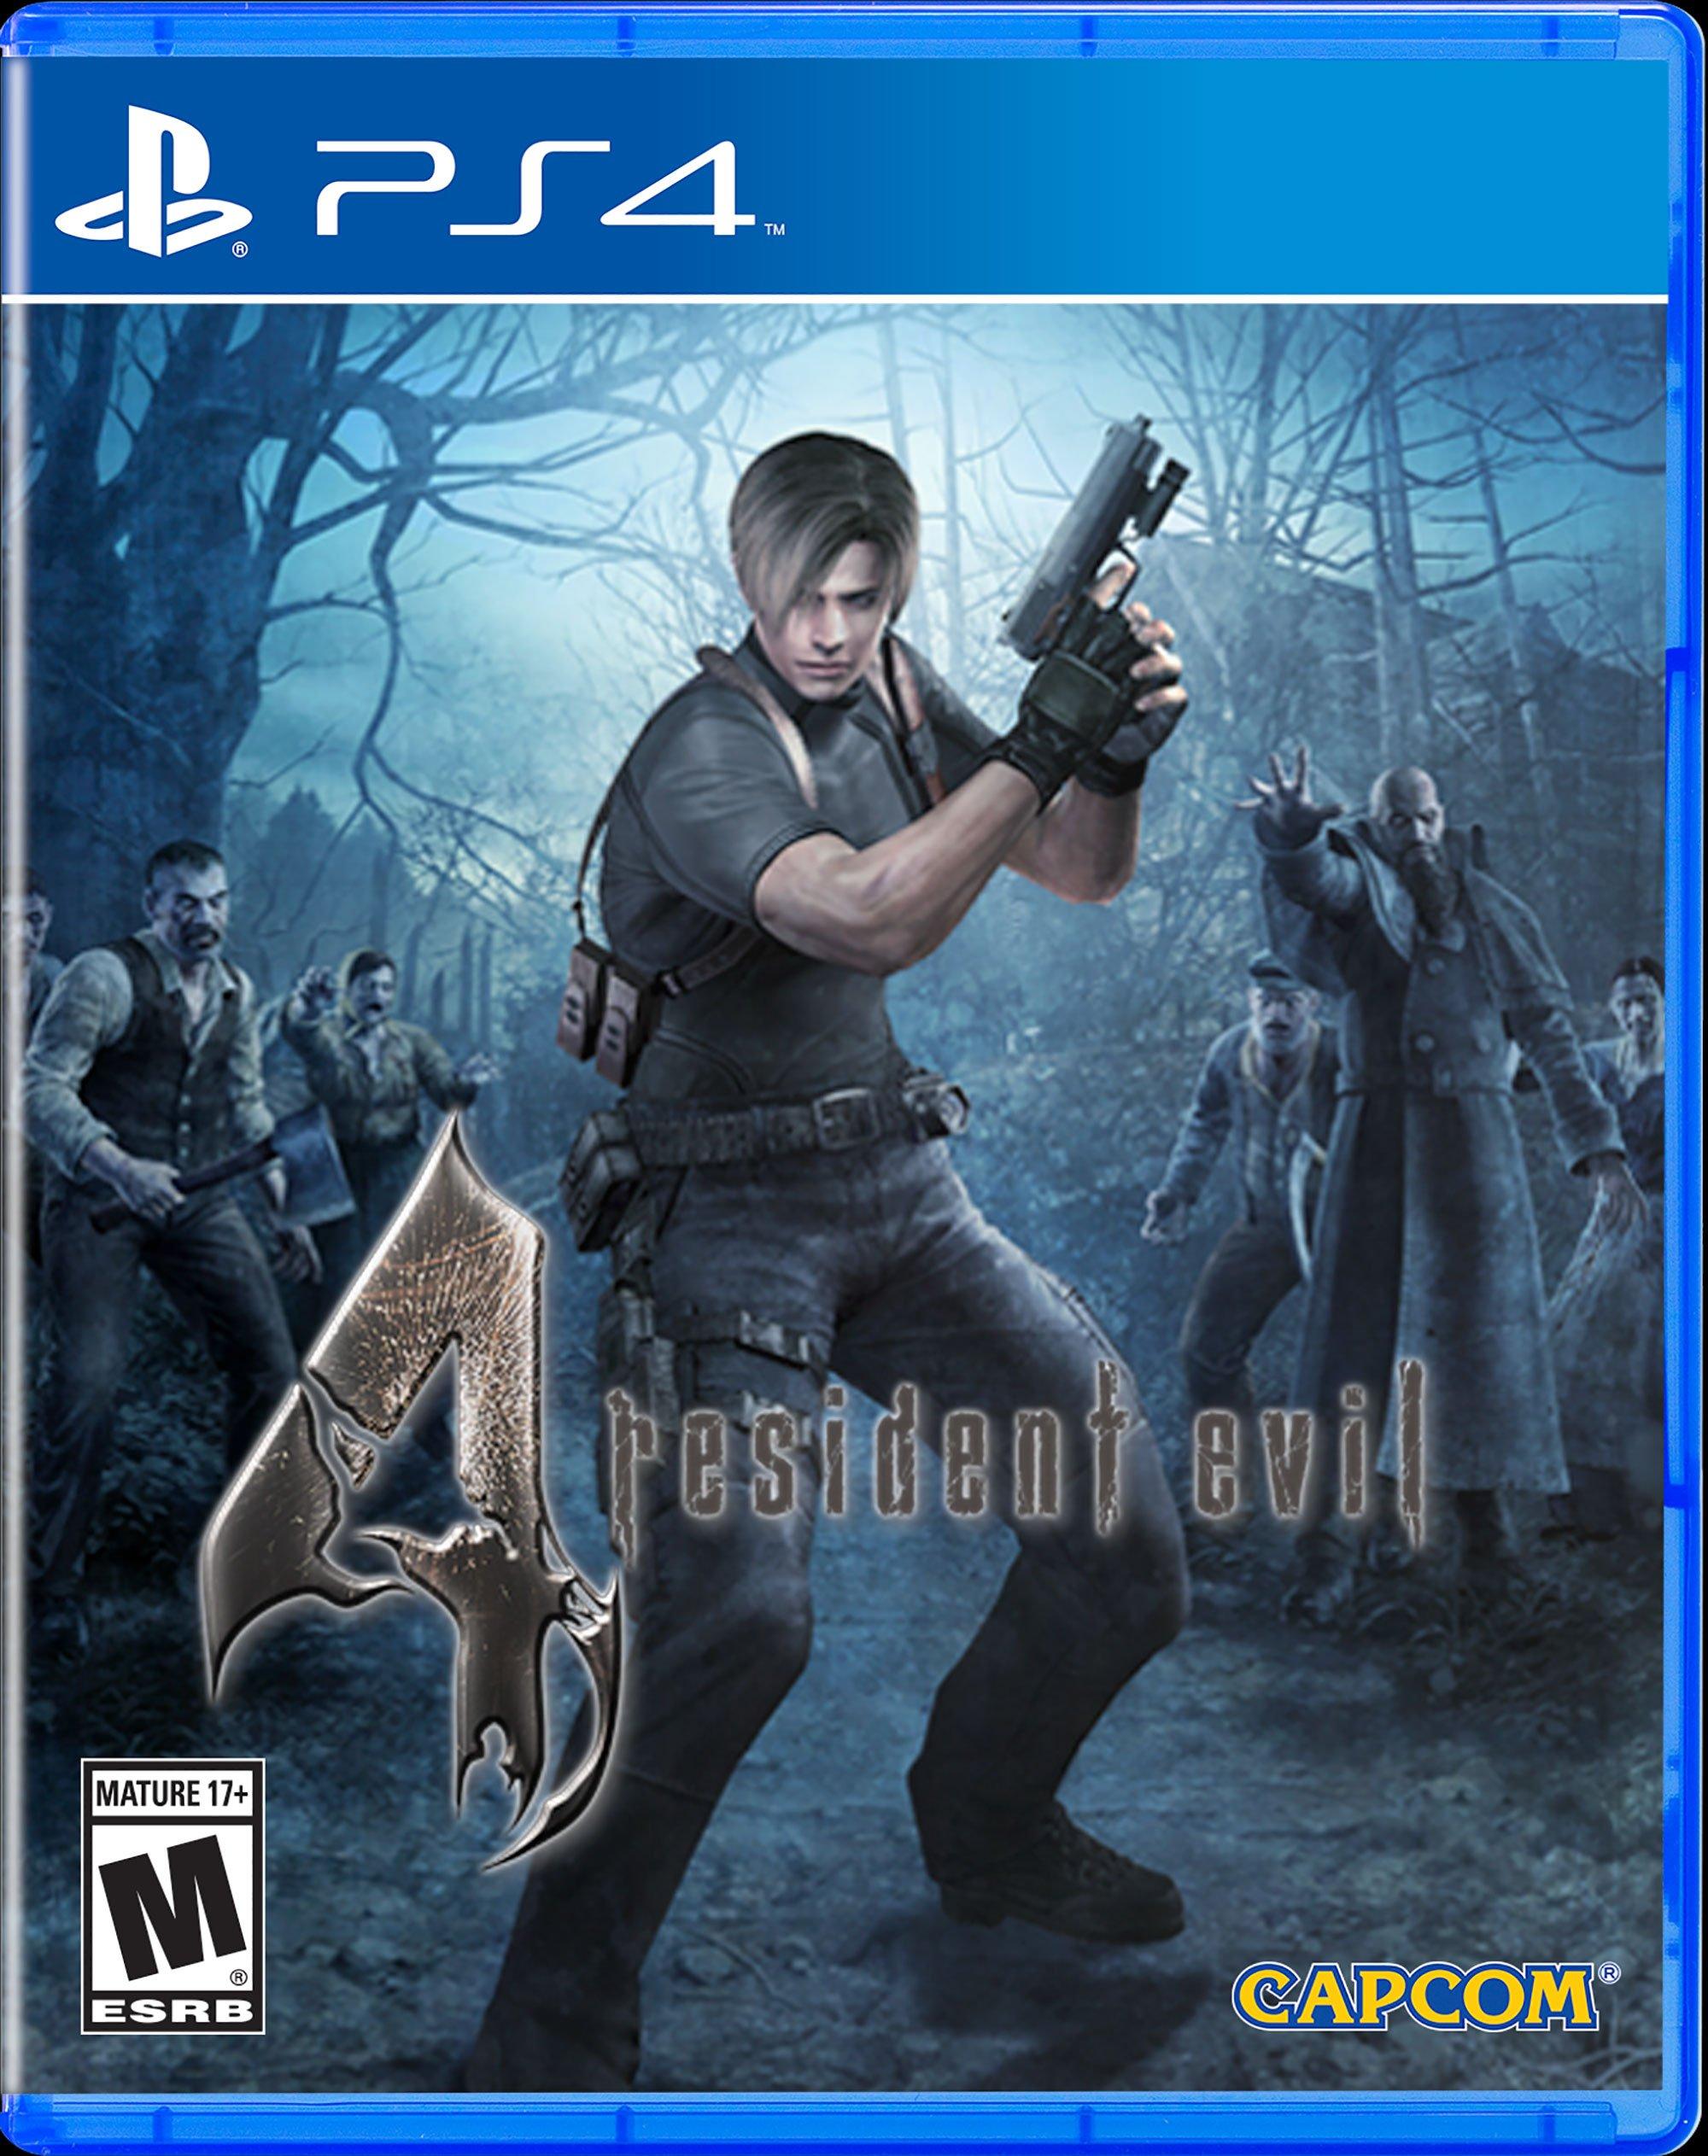 newest resident evil ps4